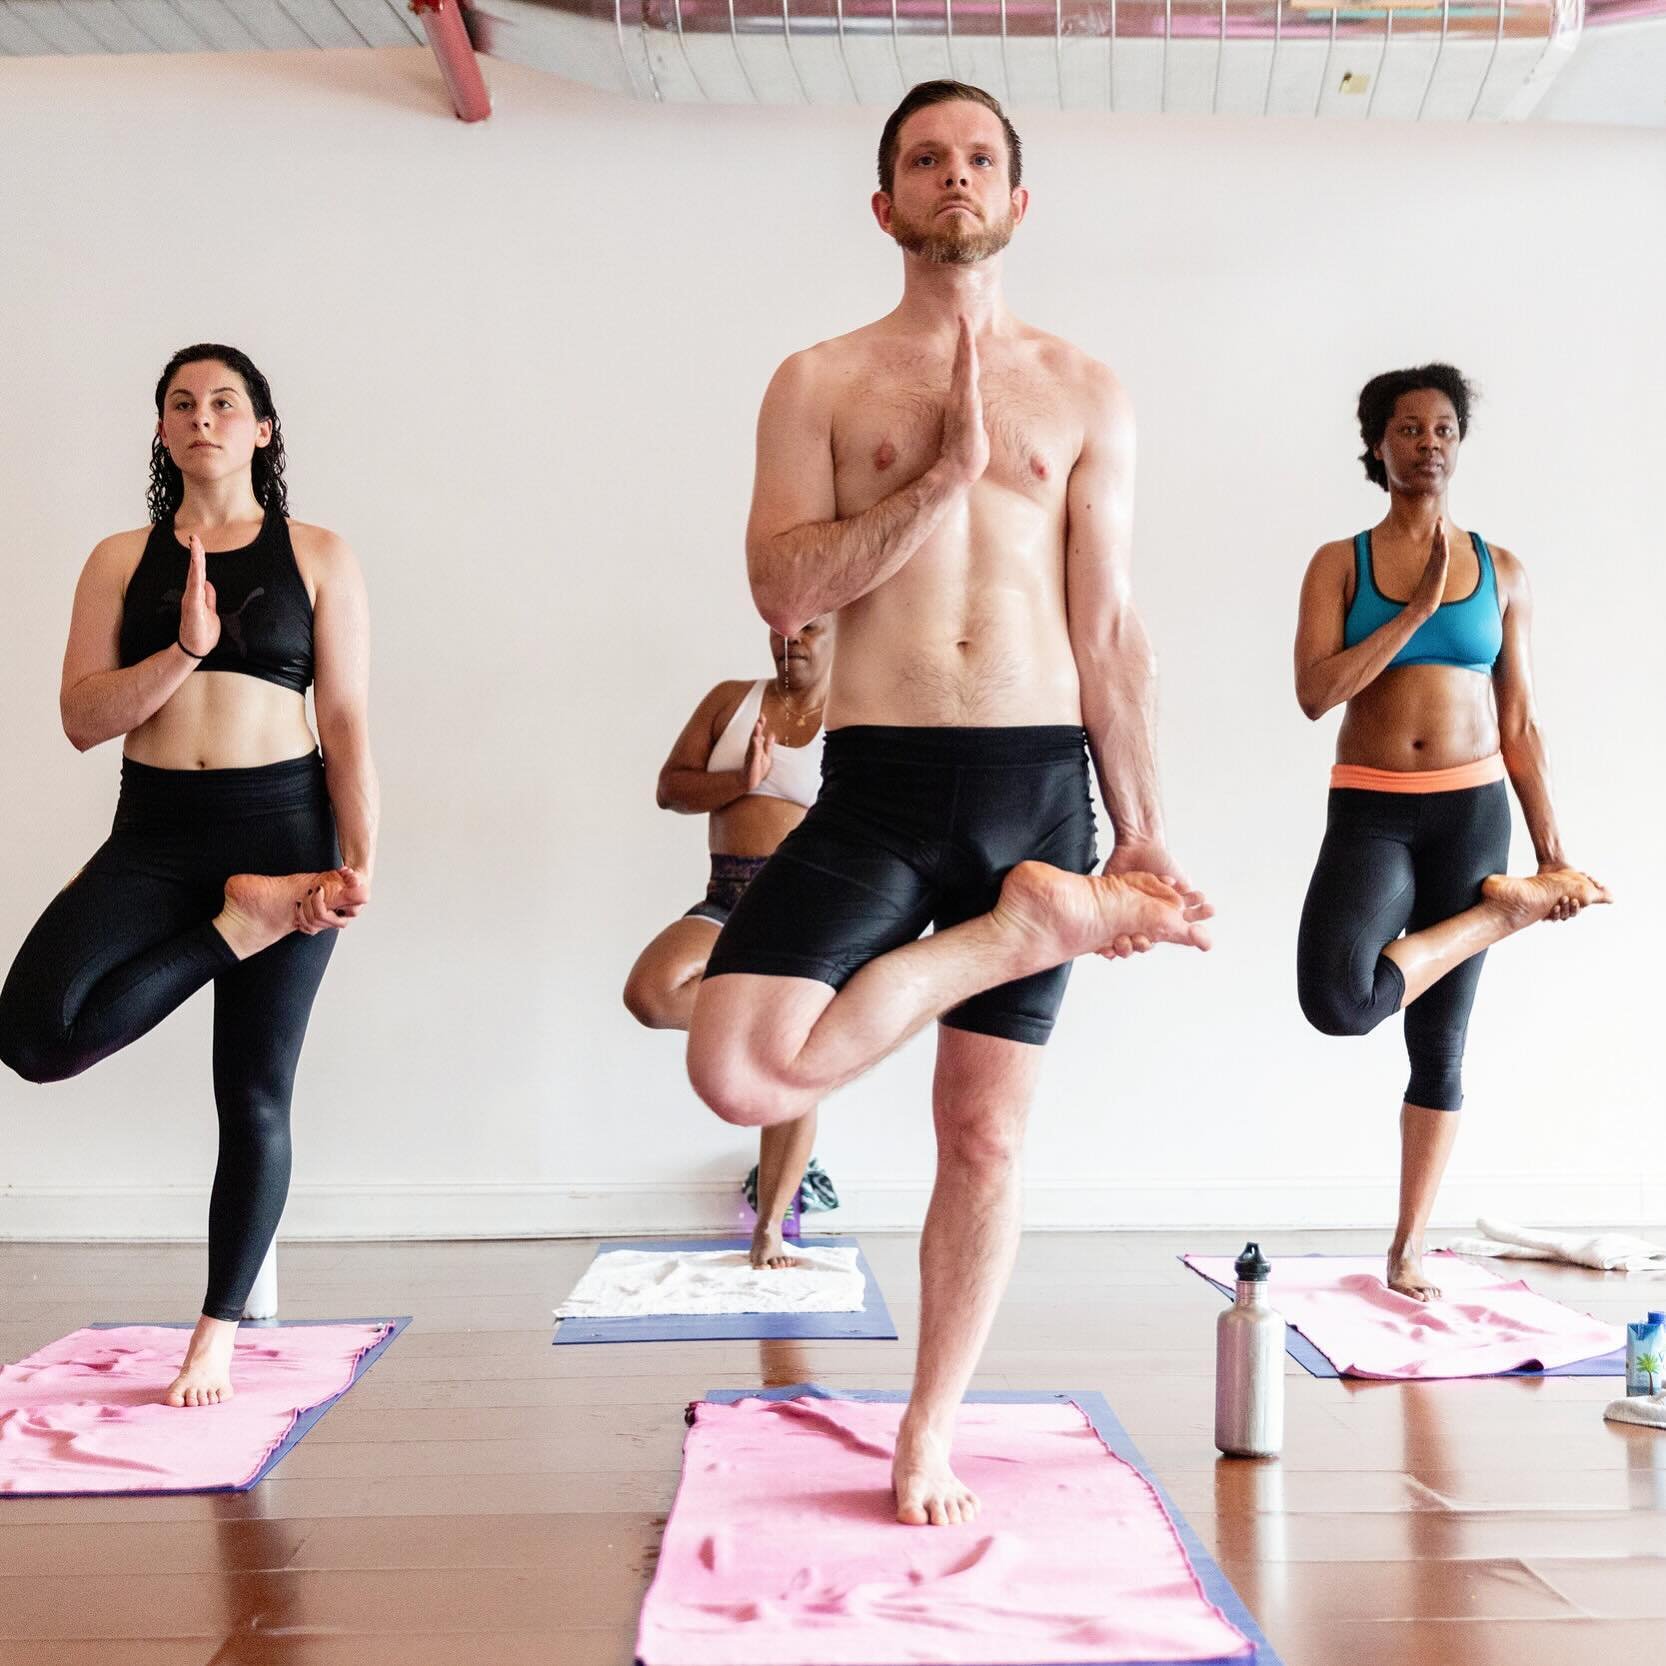 The classic hot yoga sequence is thoughtfully designed to cater to individuals of all levels, making it an ideal choice for beginners, a rewarding experience for seasoned practitioners, and a welcoming entry point for those who&rsquo;ve never explore